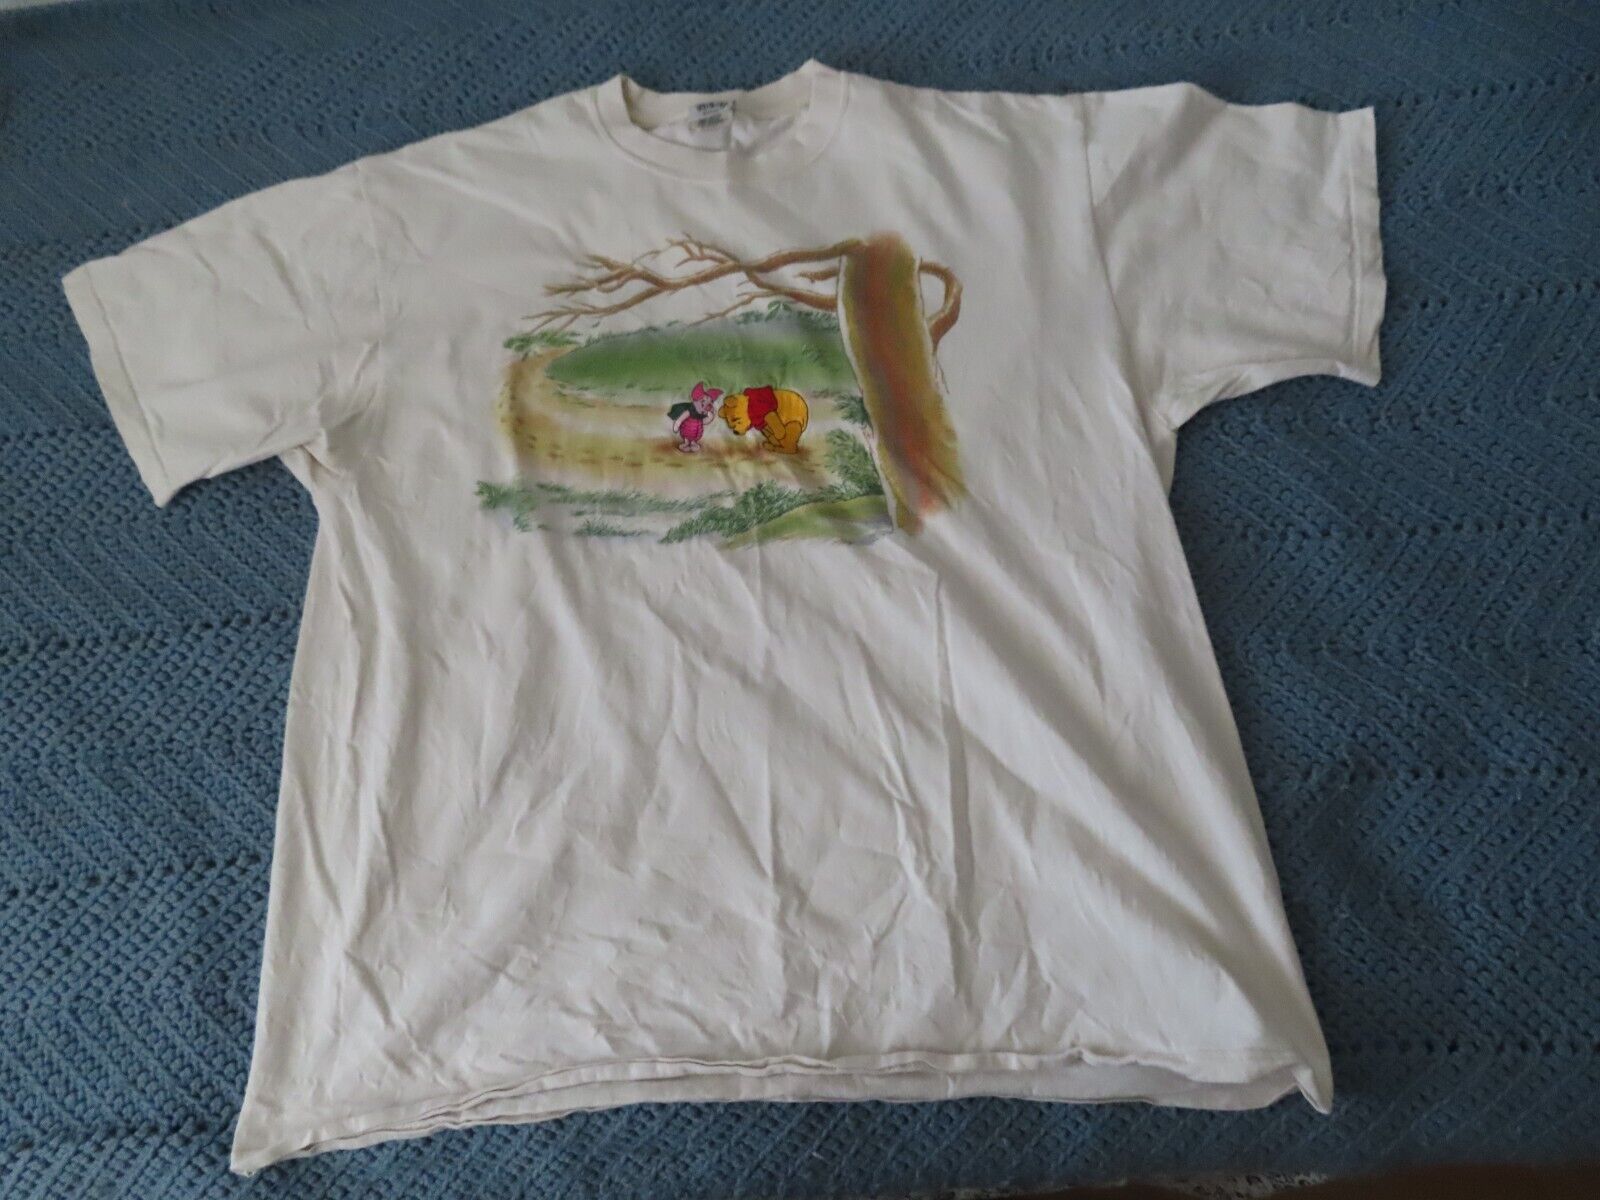 RARE Vintage Disney Store Winnie The Pooh TShirt 90s Made In USA XL embroidered